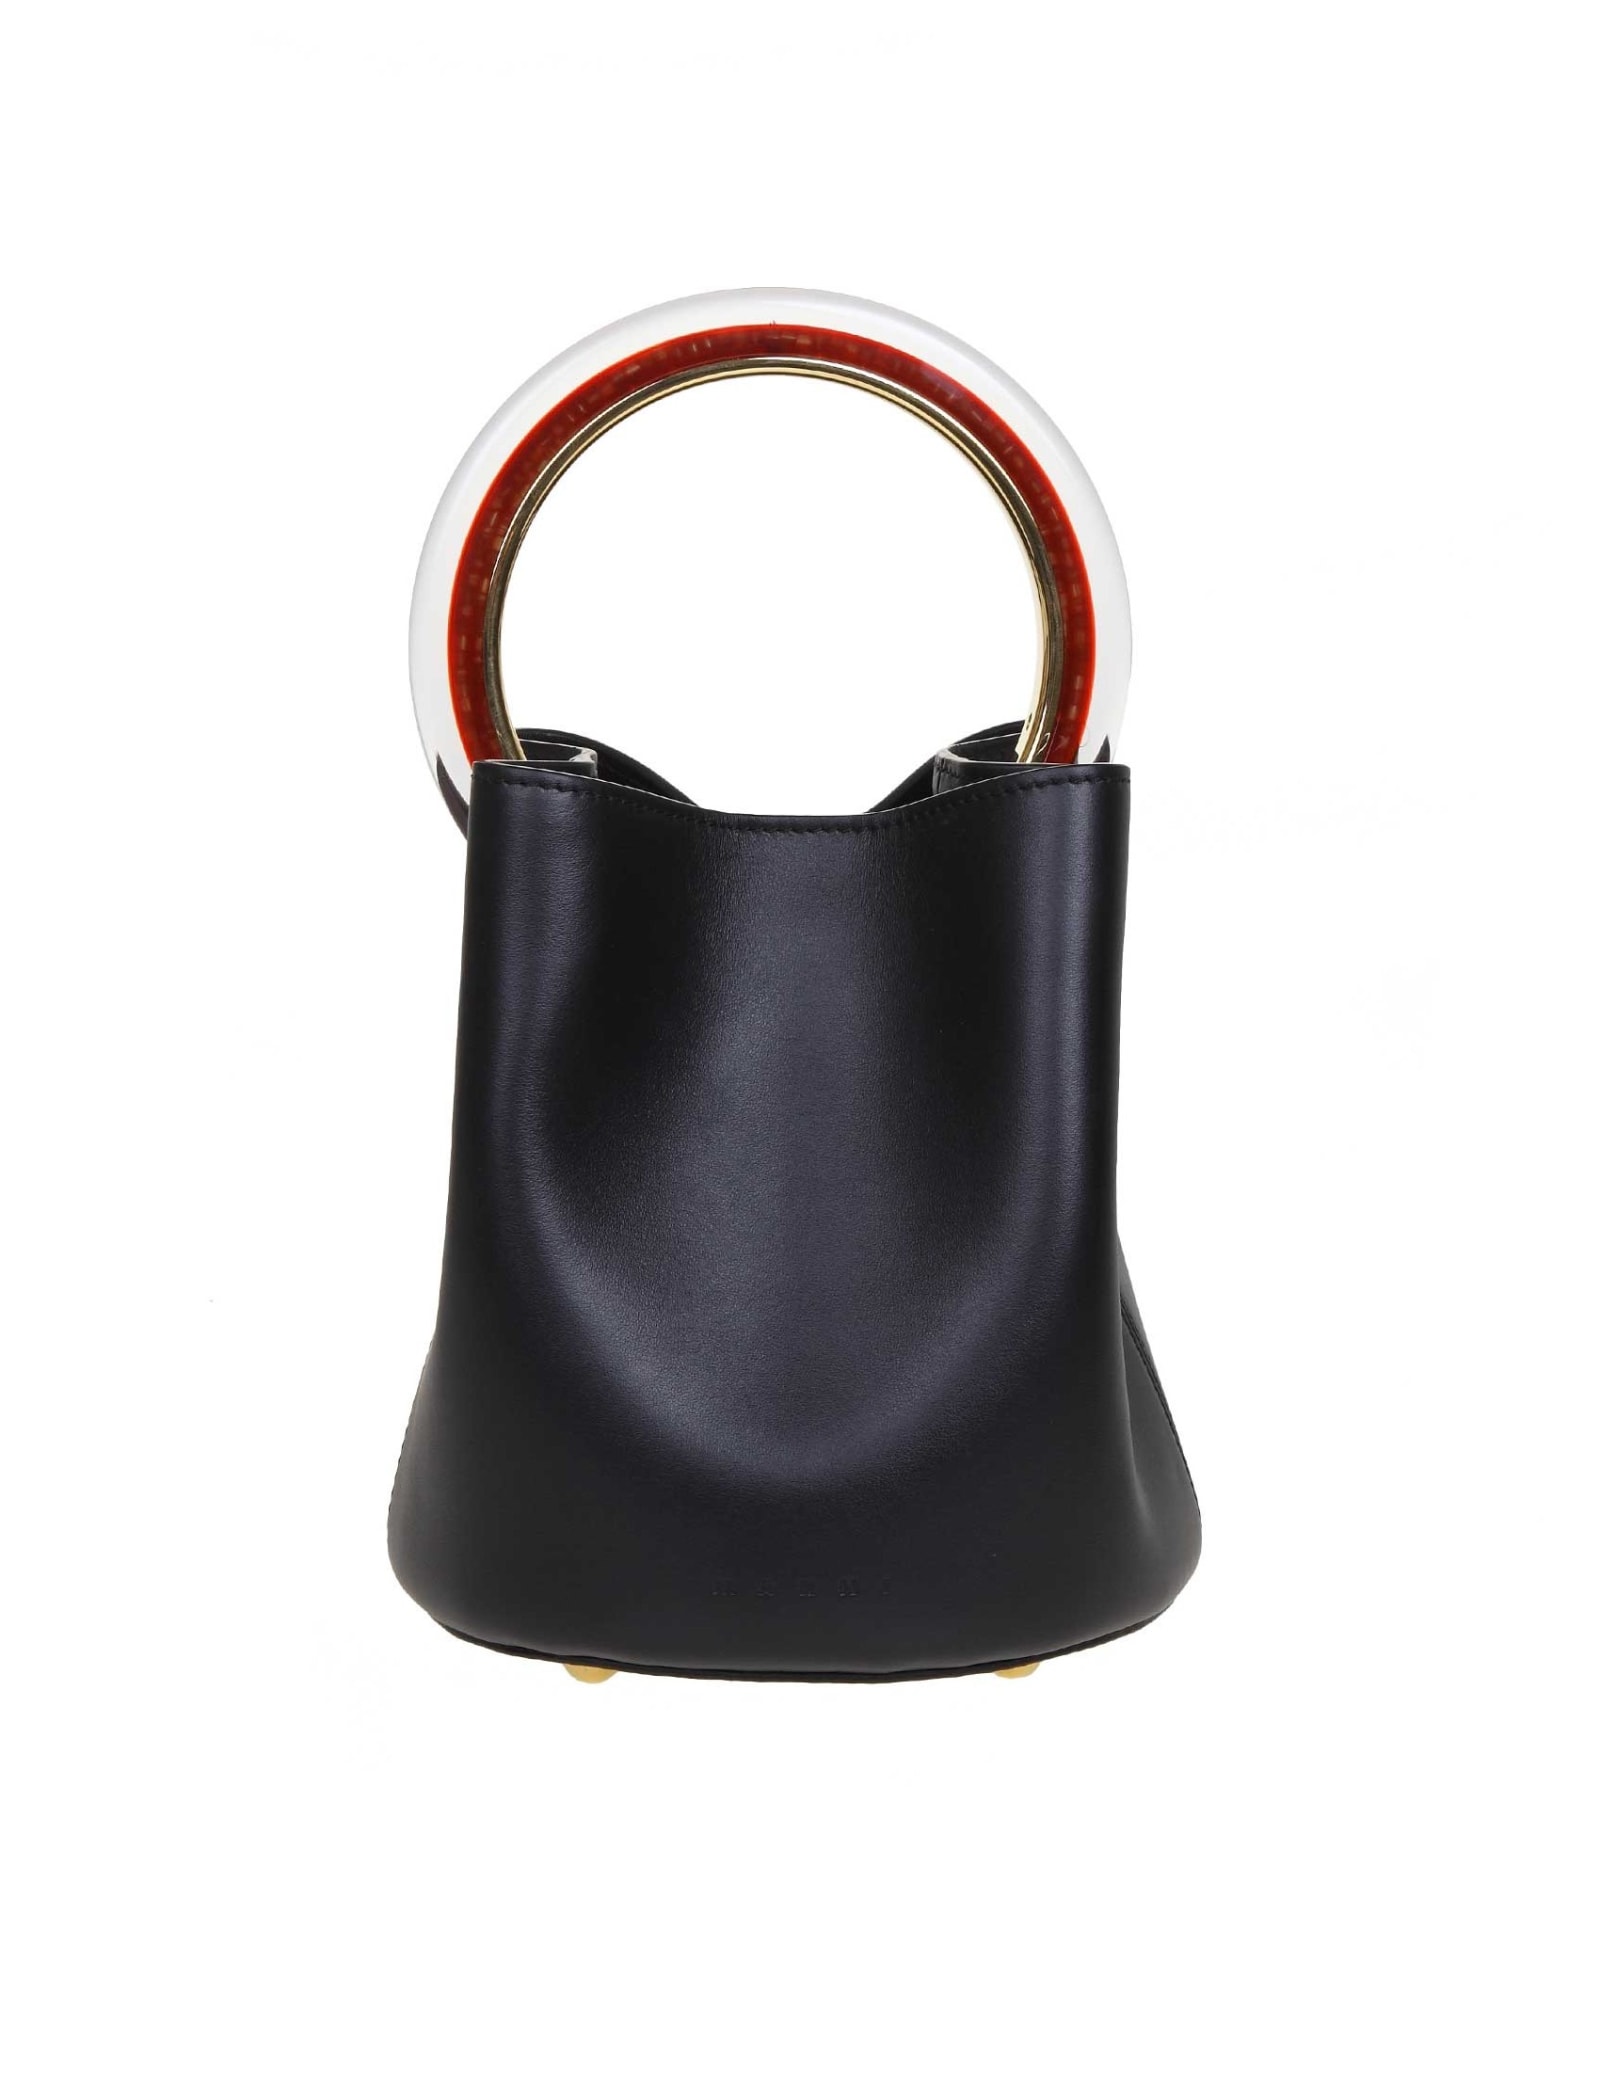 MARNI PANNIER HAND BAG IN BLACK LEATHER WITH CIRCULAR HANDLE IN RESIN AND METAL,11232426